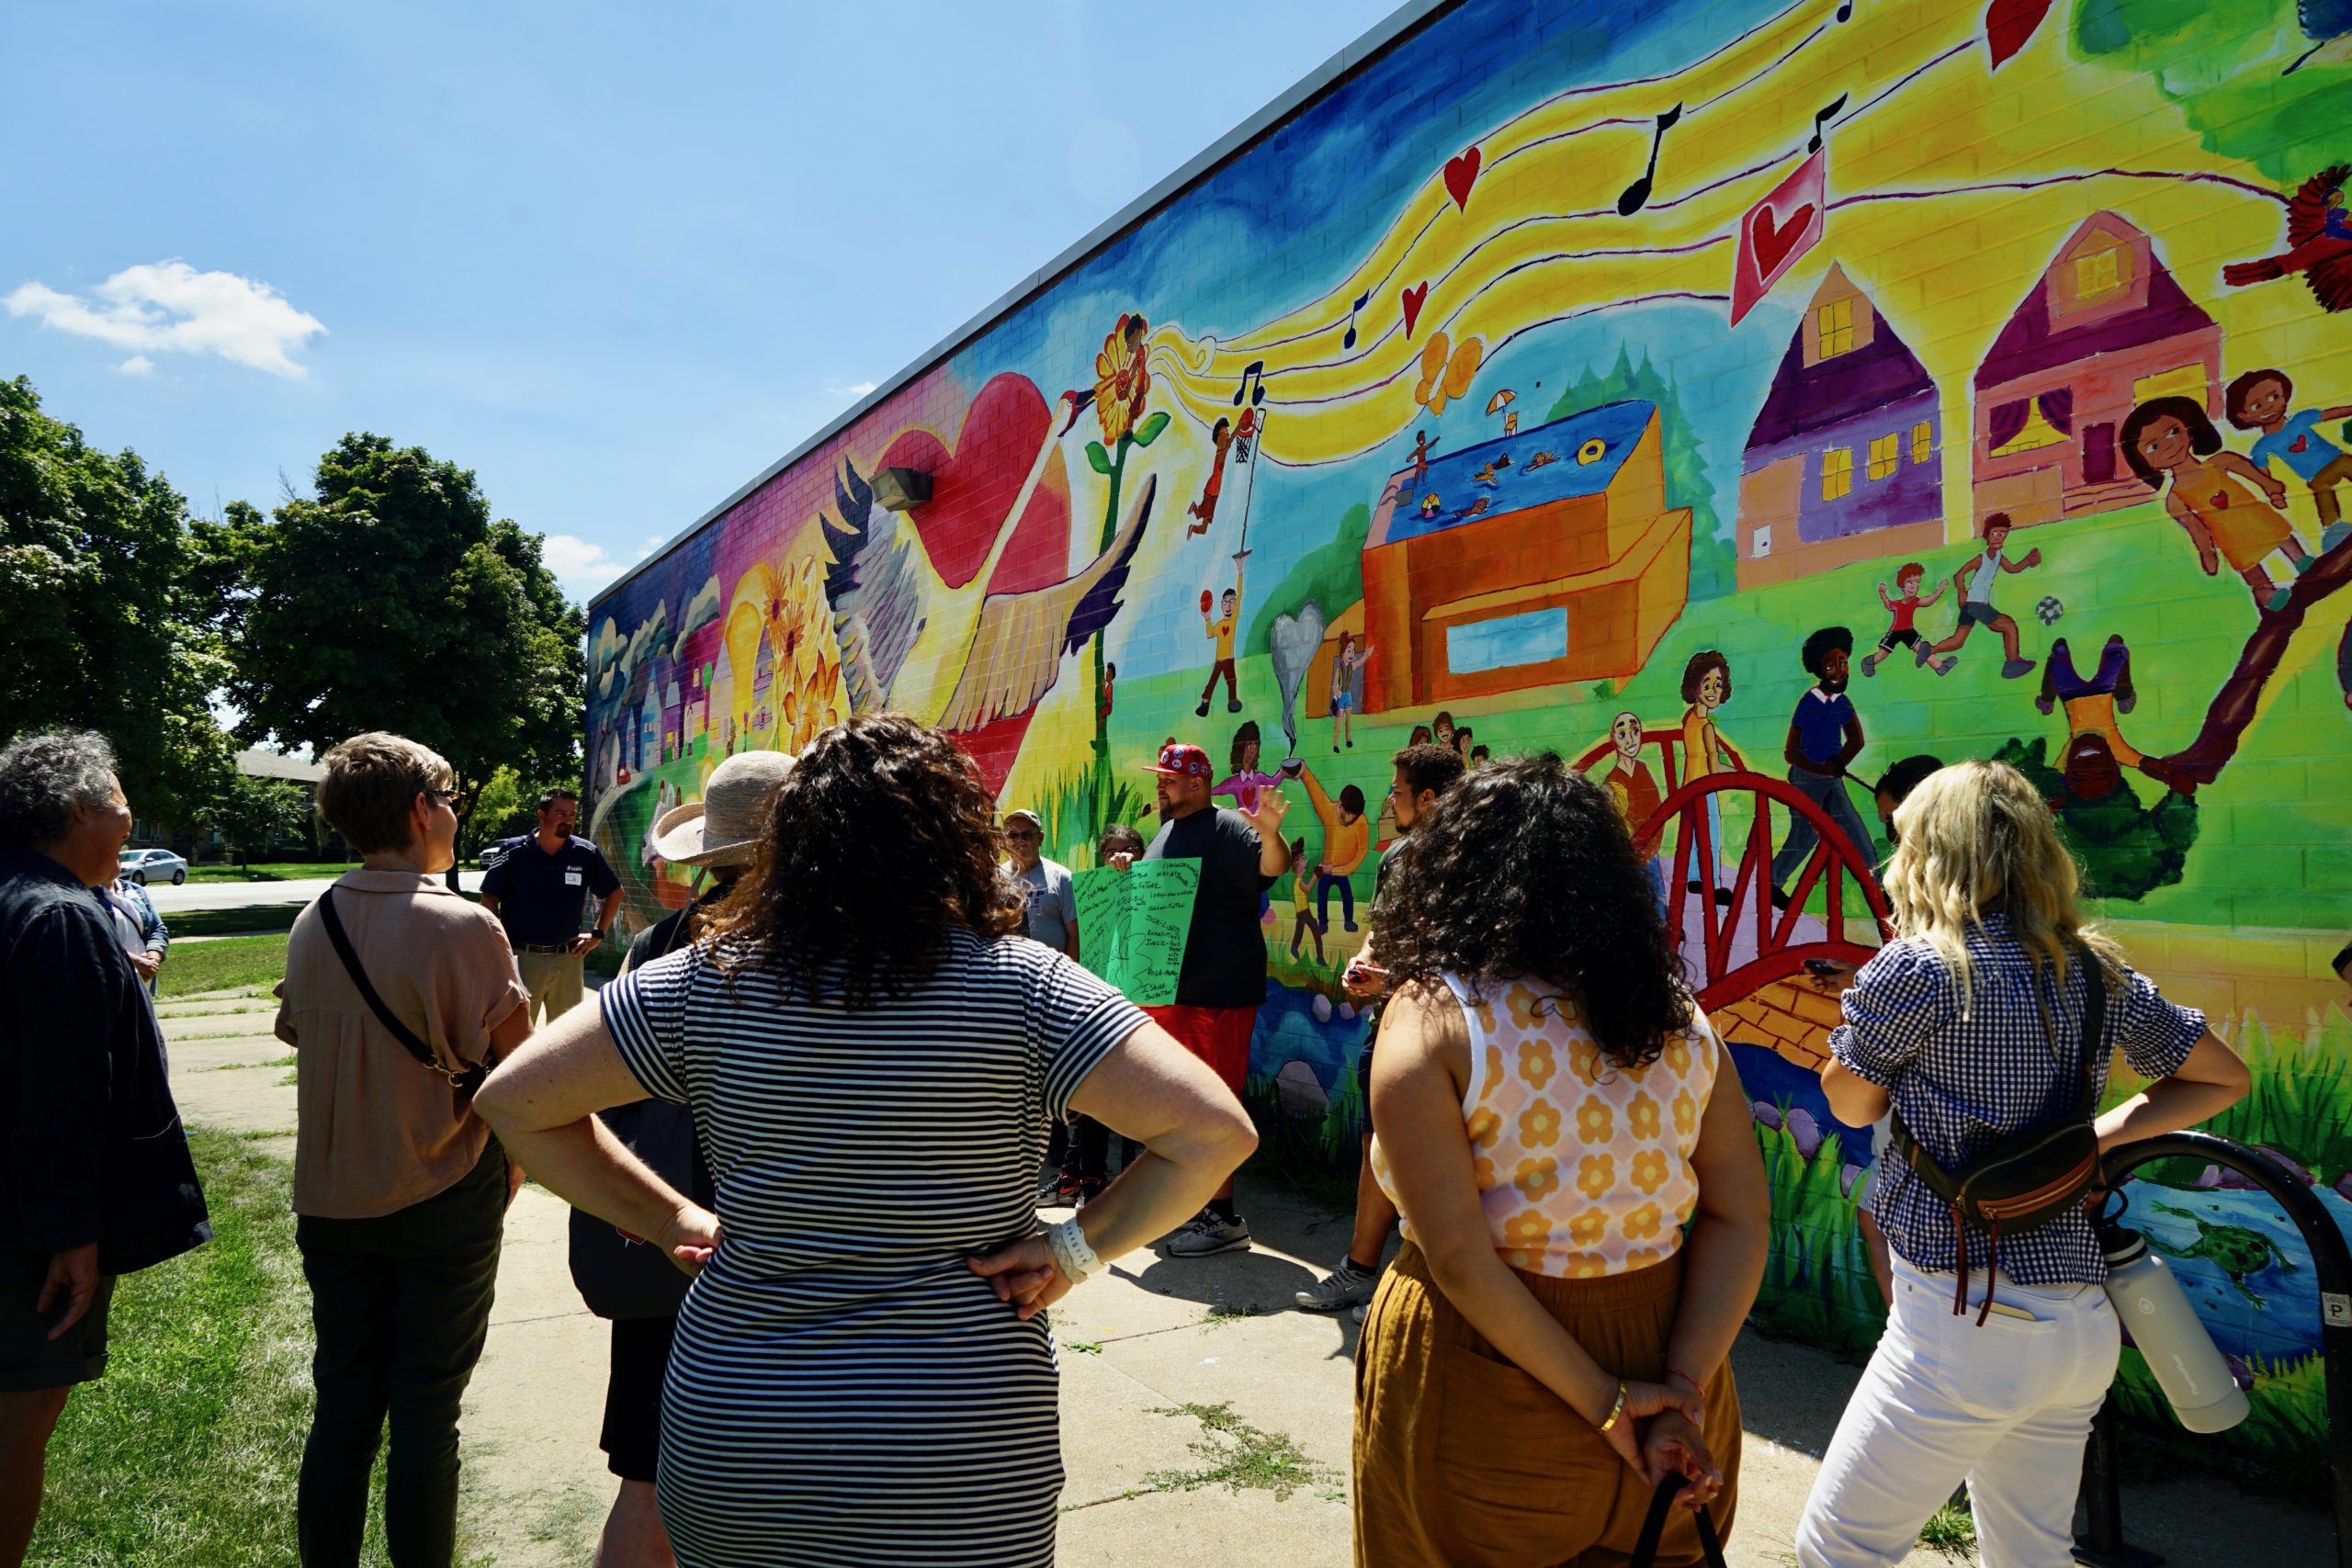 people facing away from the camera looking at a bright, colorful outdoor mural depicting community